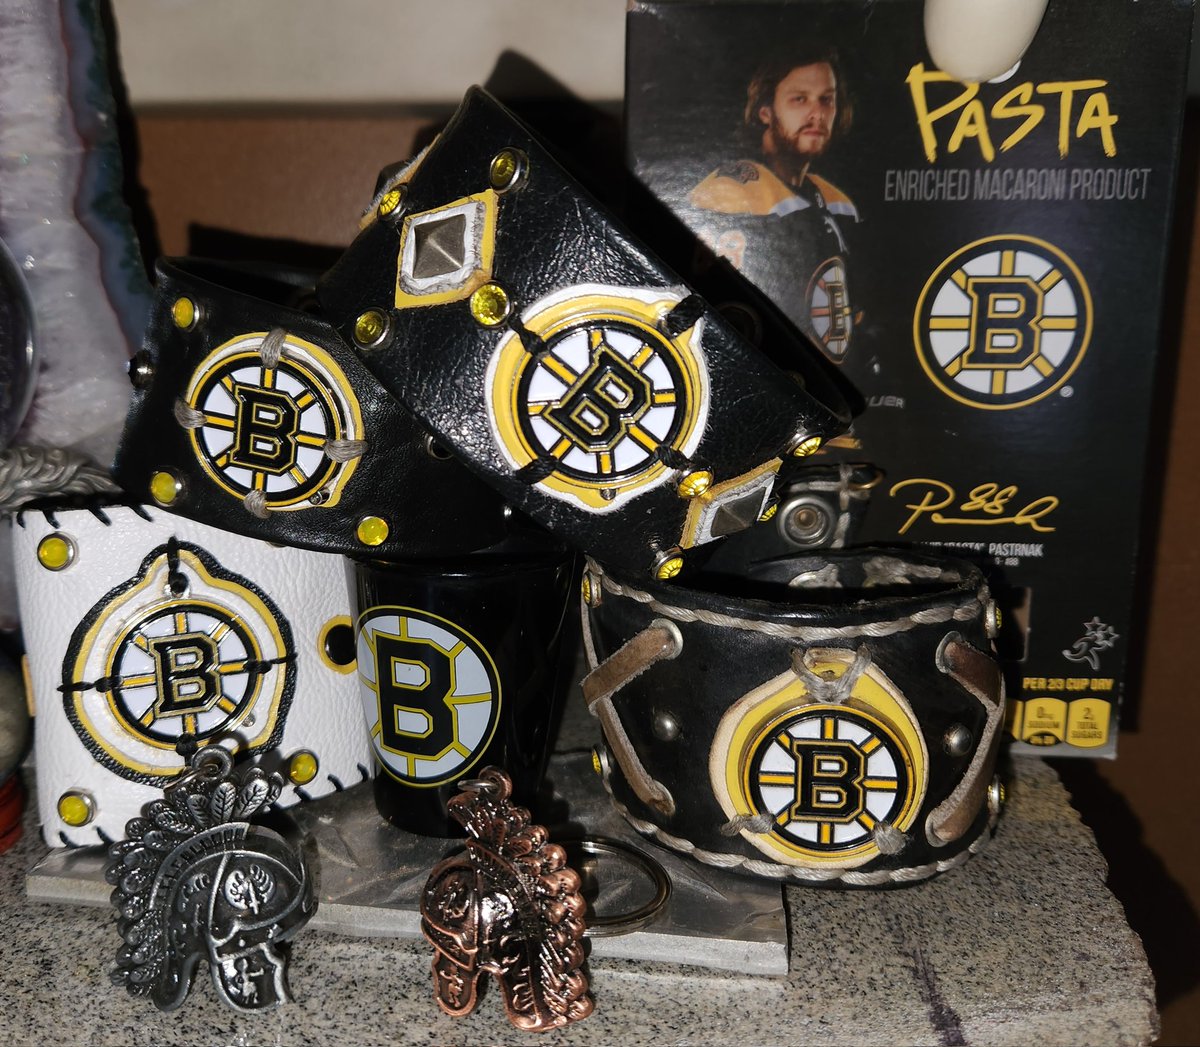 Good luck to the @NHLBruins tonight against the @FlaPanthers #CheckOut my #oneofakind #custom #handcrafted #leathercuffs #repurposed #leather and  #bostonbruins #keychain #topquality #rhinestones from the @RhinestoneGuy #signed and #dated  #rockthecuff